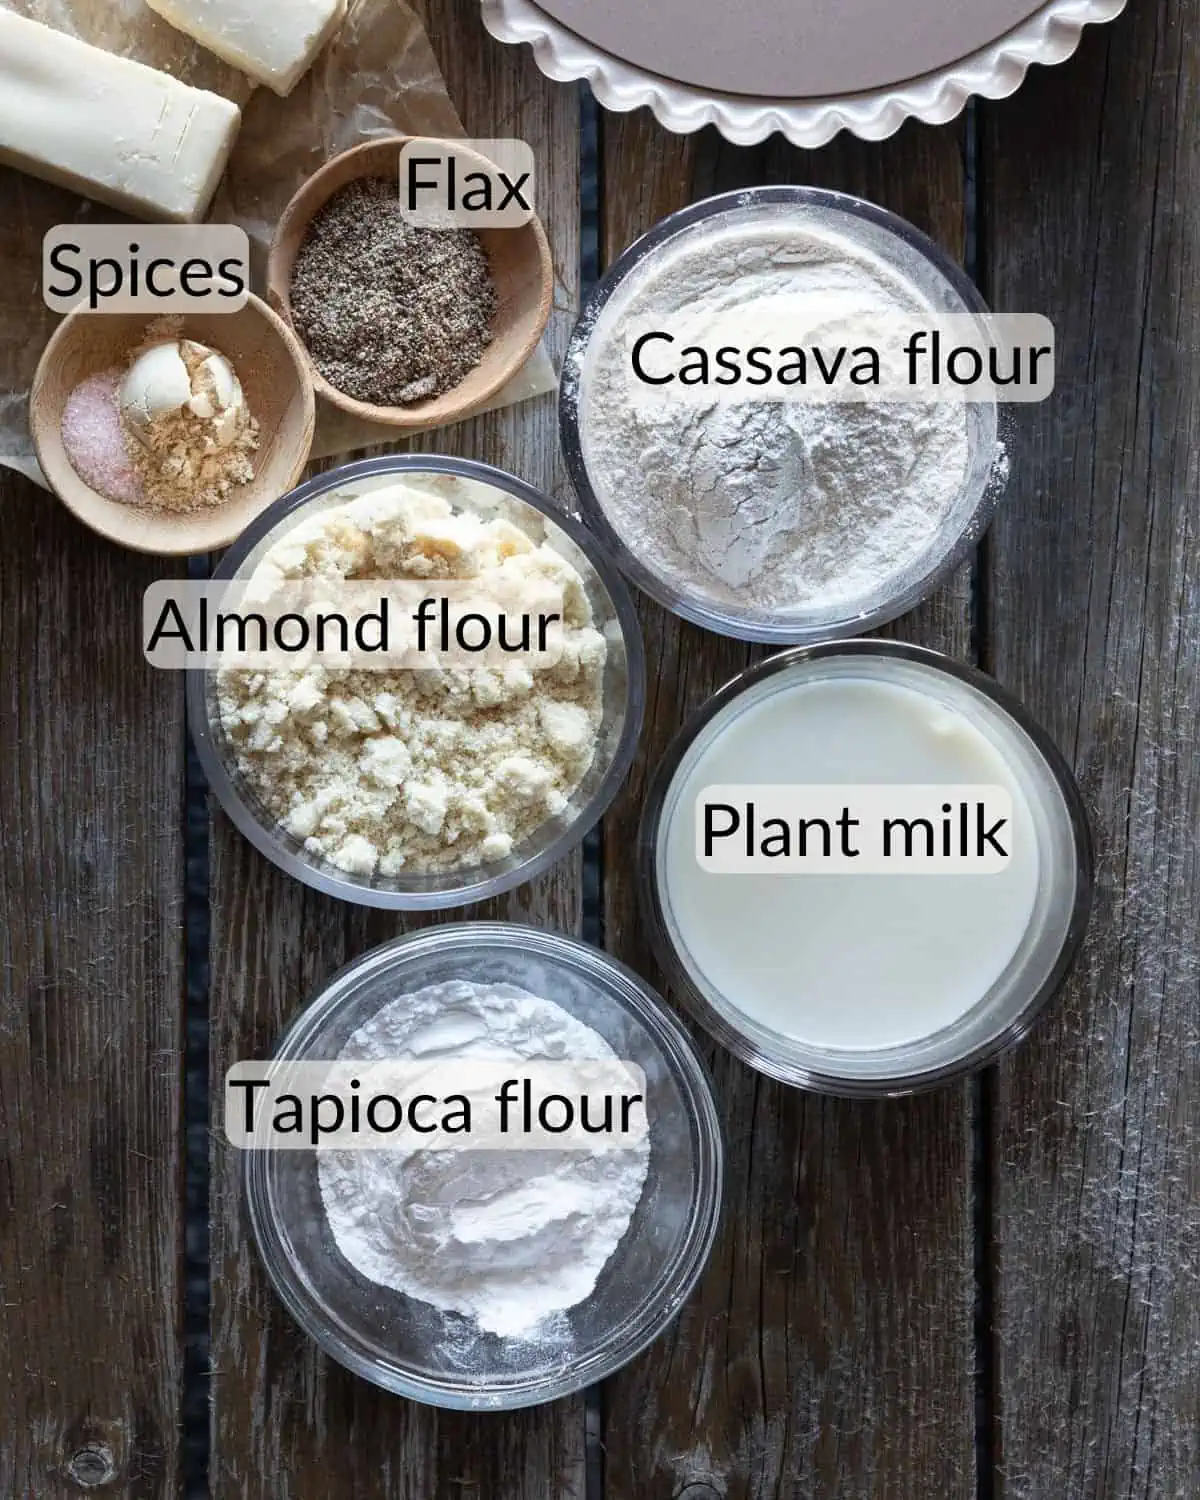 Ingredient image for a recipe post on making gluten free and vegan quiche. The image shows flax, spices, tapioca flour, almond flour, cassava flour, and plant milk.